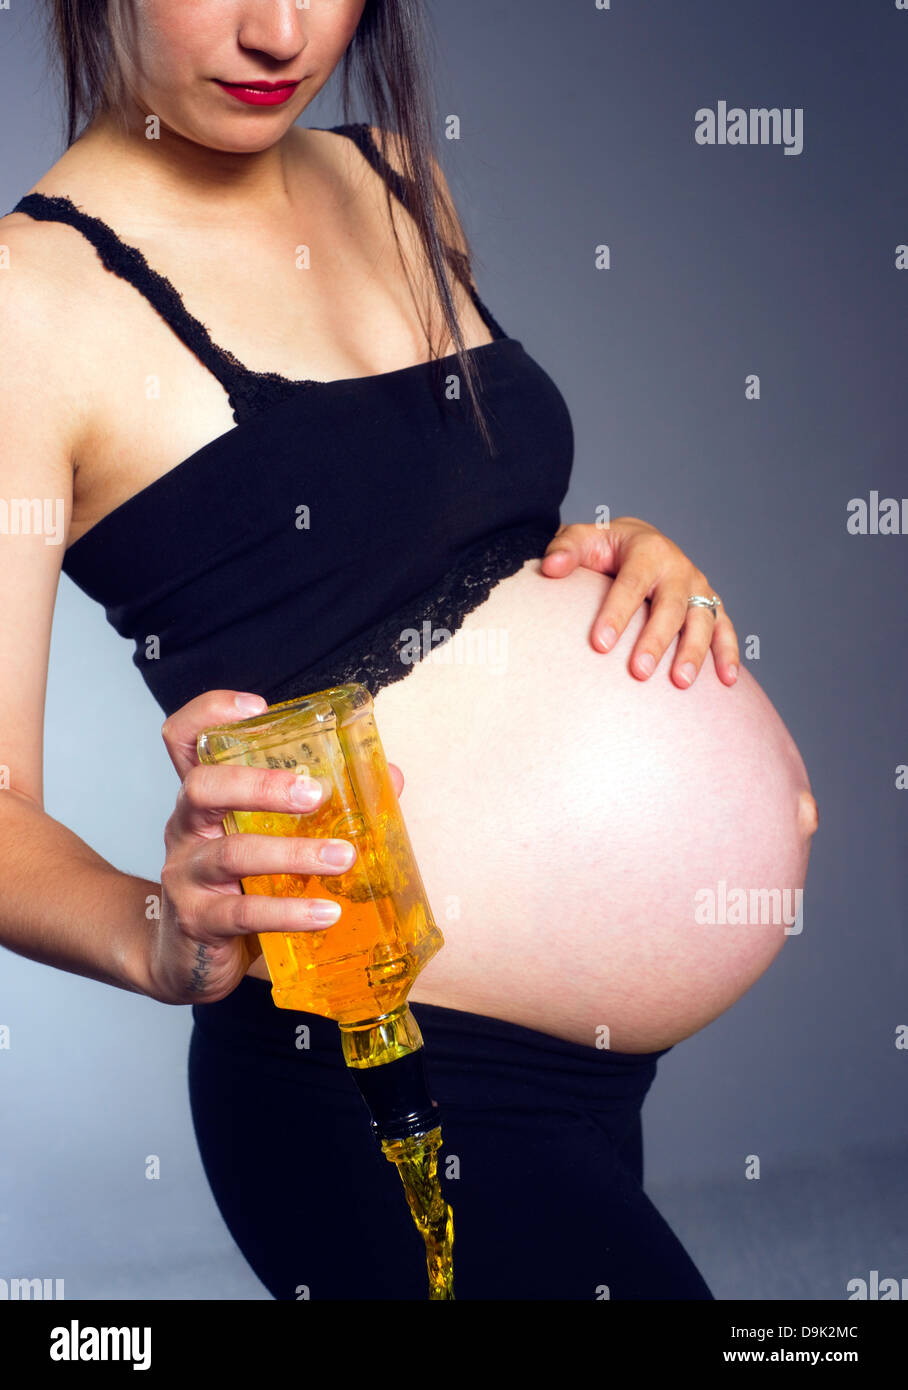 Vertical composition of woman pouring out a bottle of hard whiskey during pregnancy Stock Photo